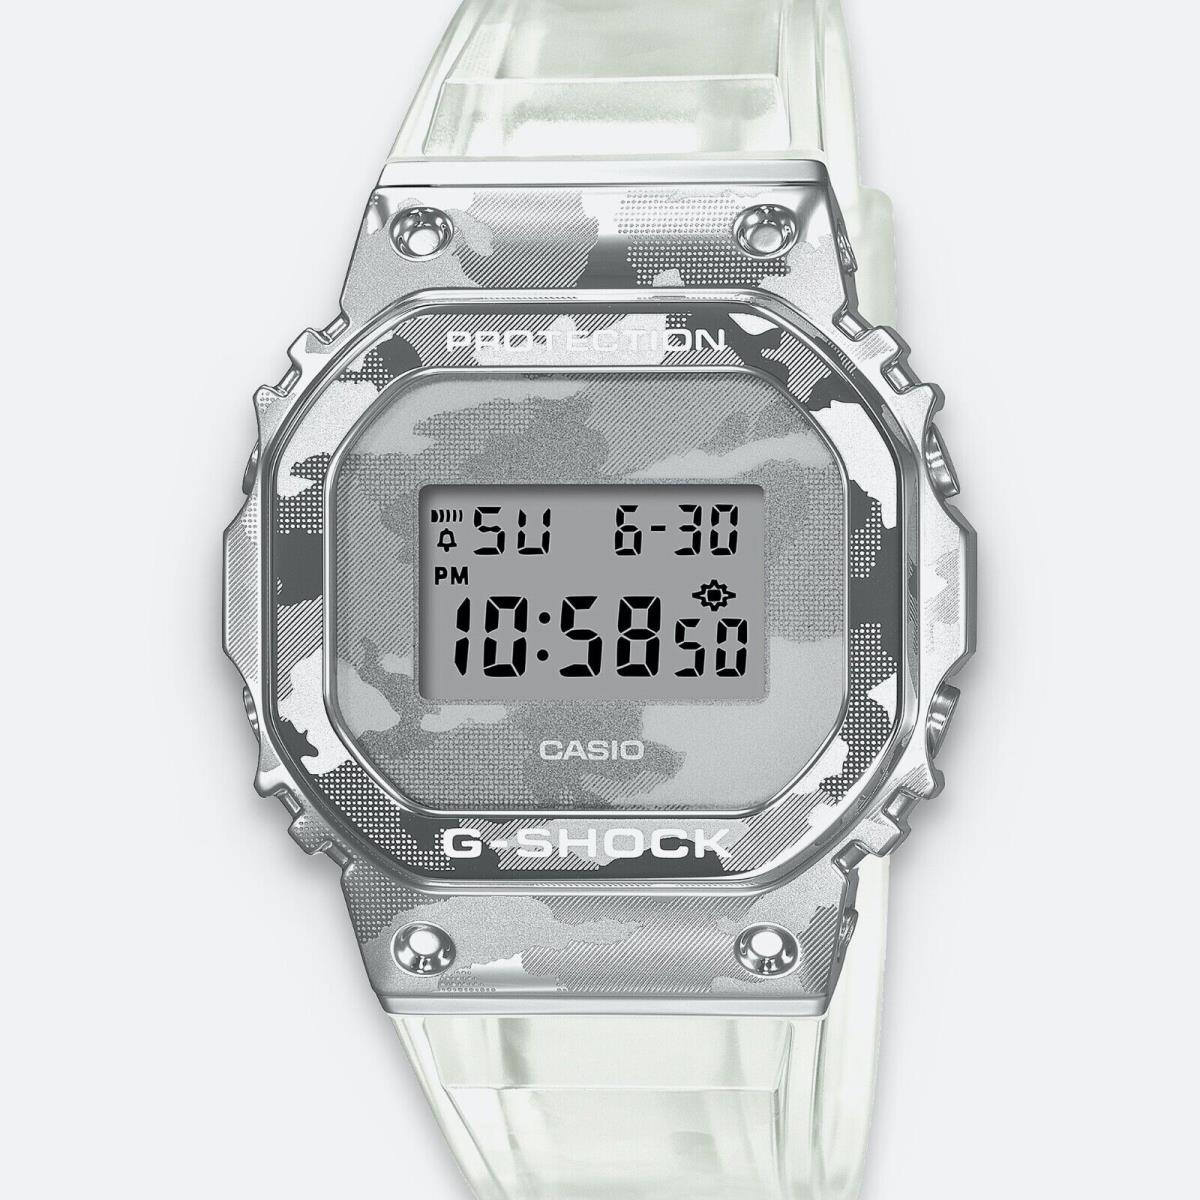 Casio watch [GM5600]  - Silver , CAMO Dial, Camouflage Band 0